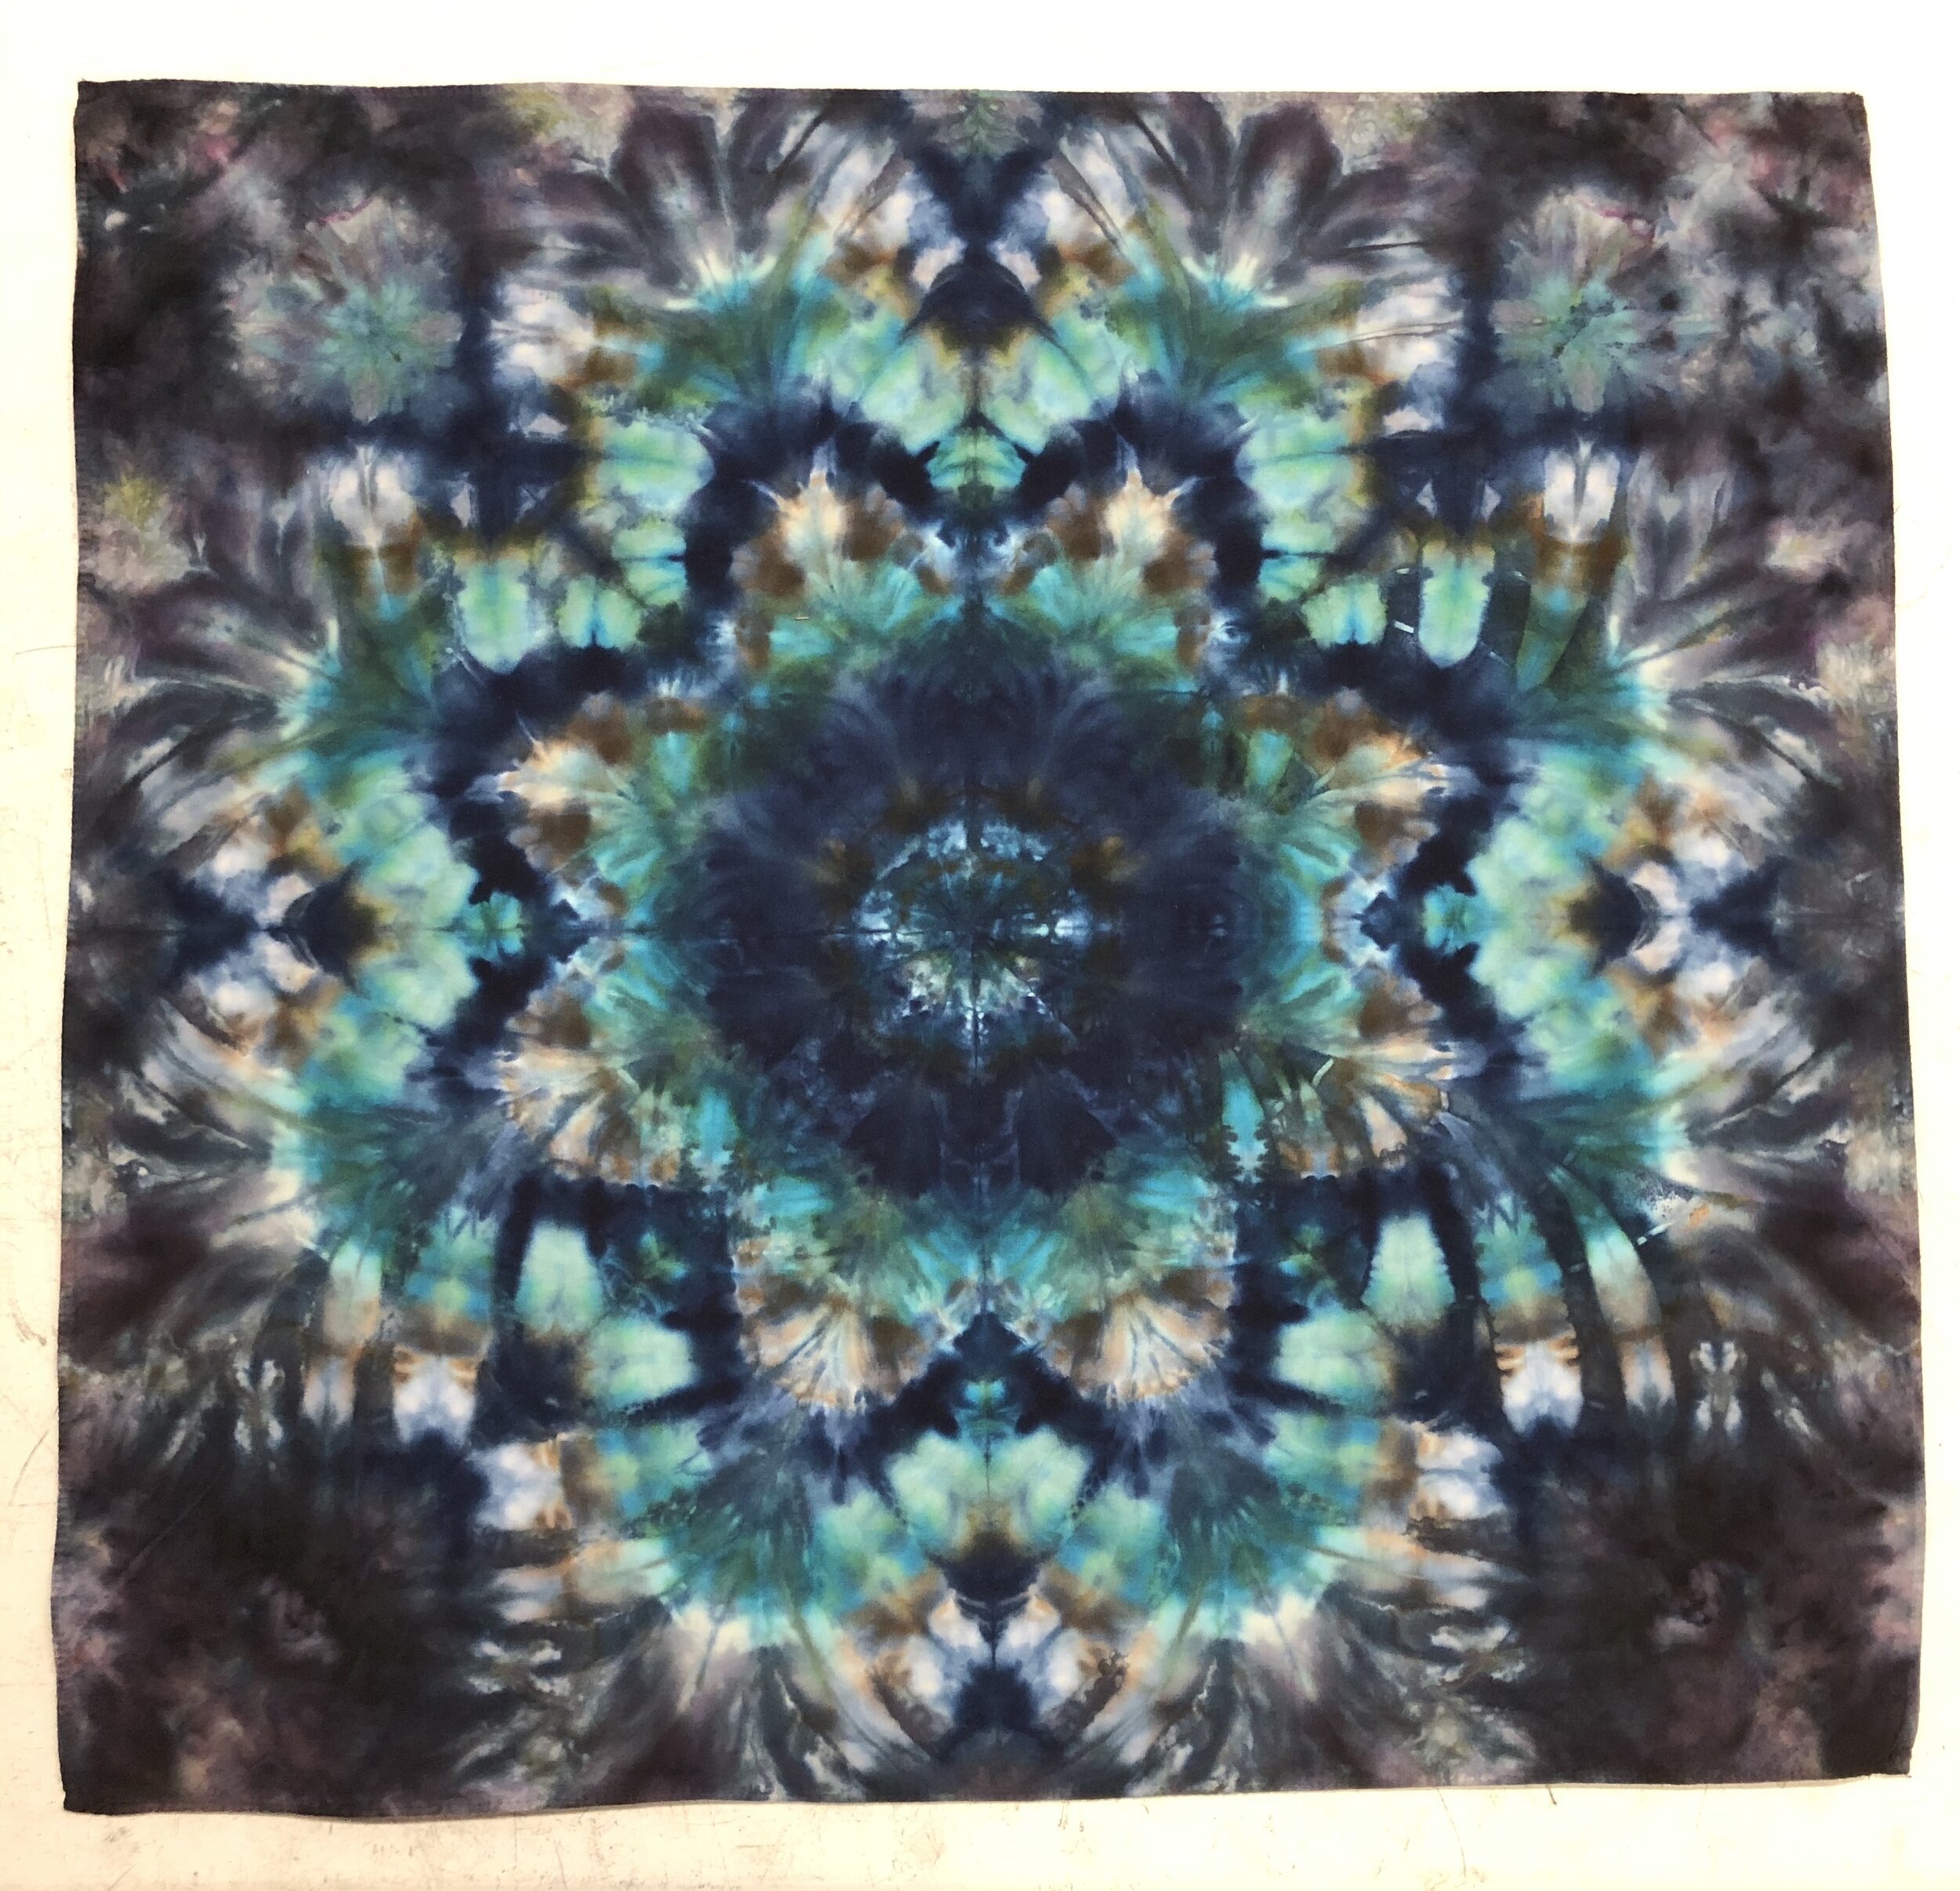 "Star Flower" mandala, rubber bands, ice dyed